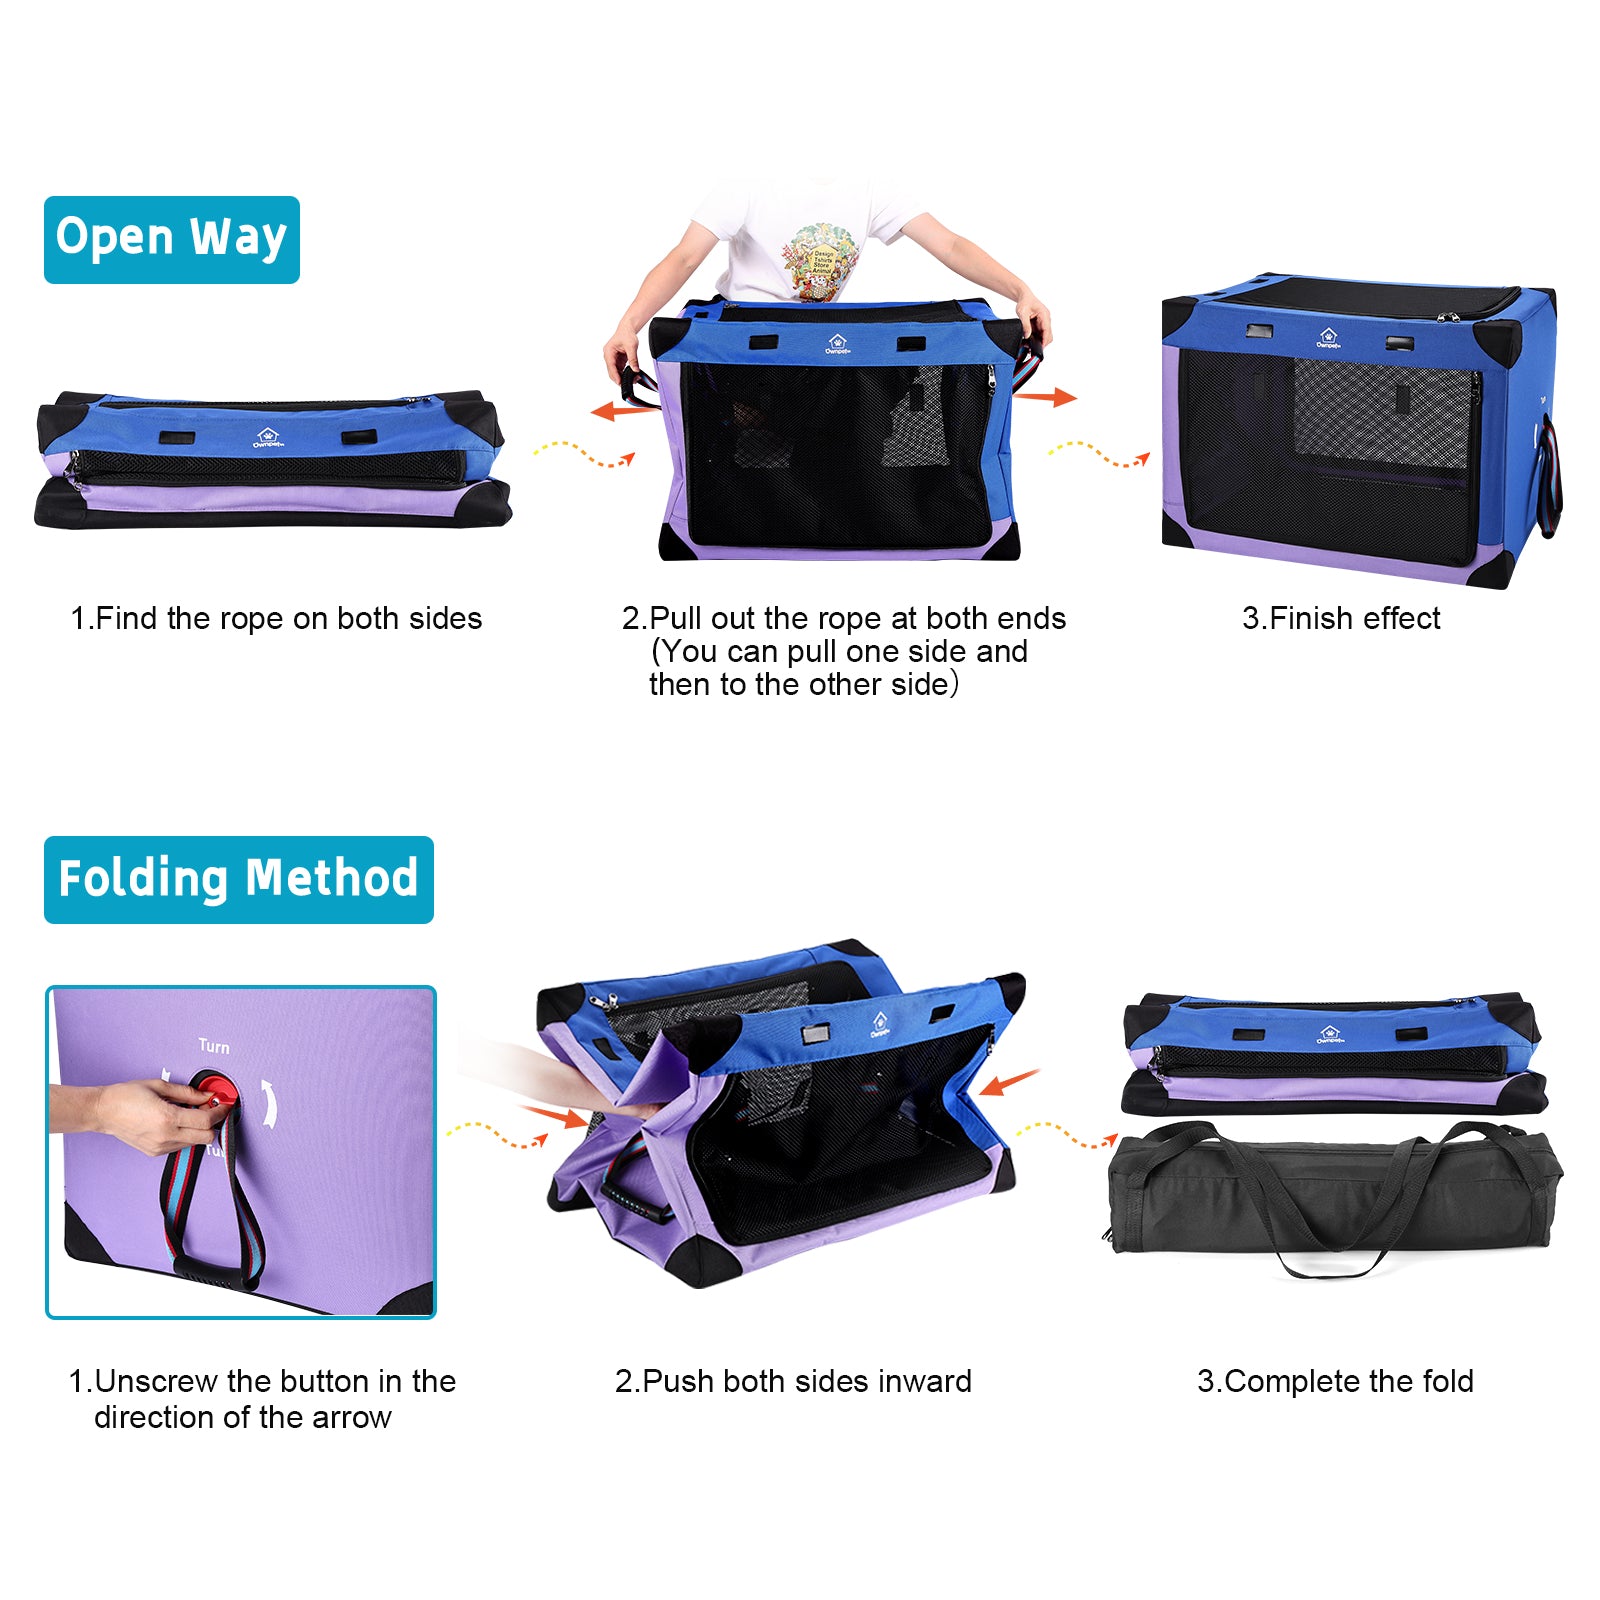 Ownpets Large 3 Doors Soft Collapsible Dog Crate Dog Kennel, Blue & Purple